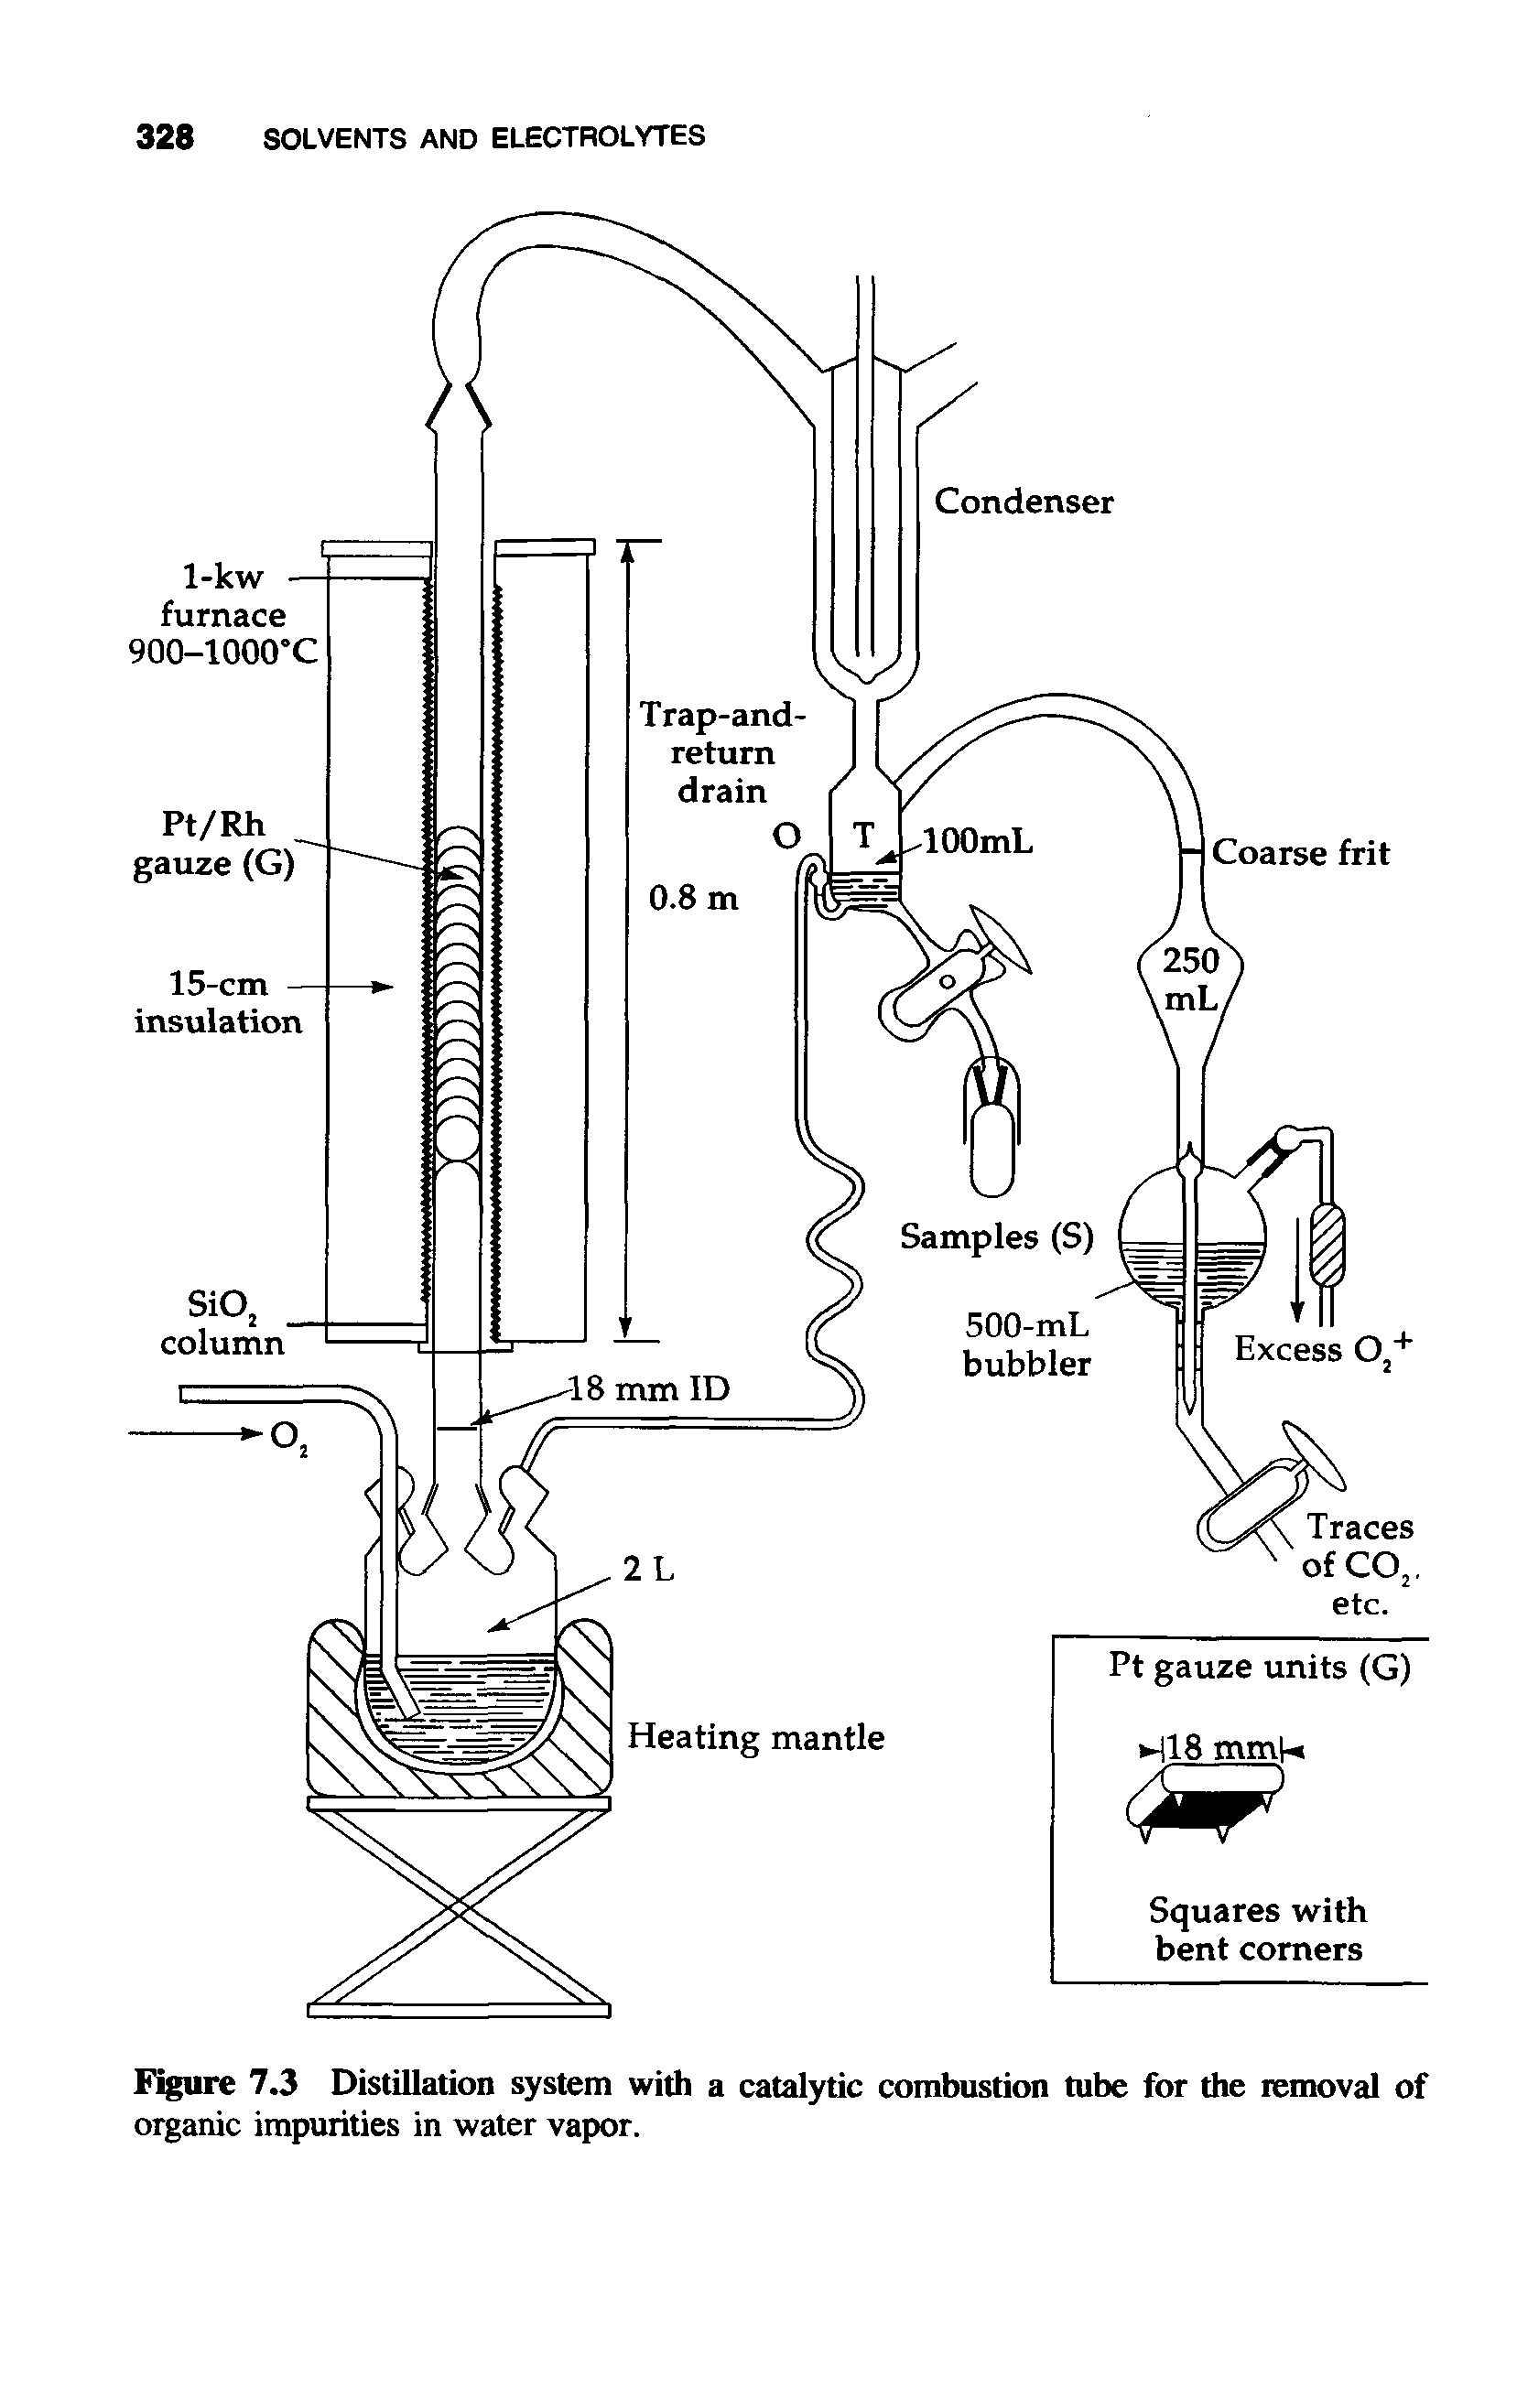 Figure 7.3 Distillation system with a catalytic combustion tube for the removal of organic impurities in water vapor.